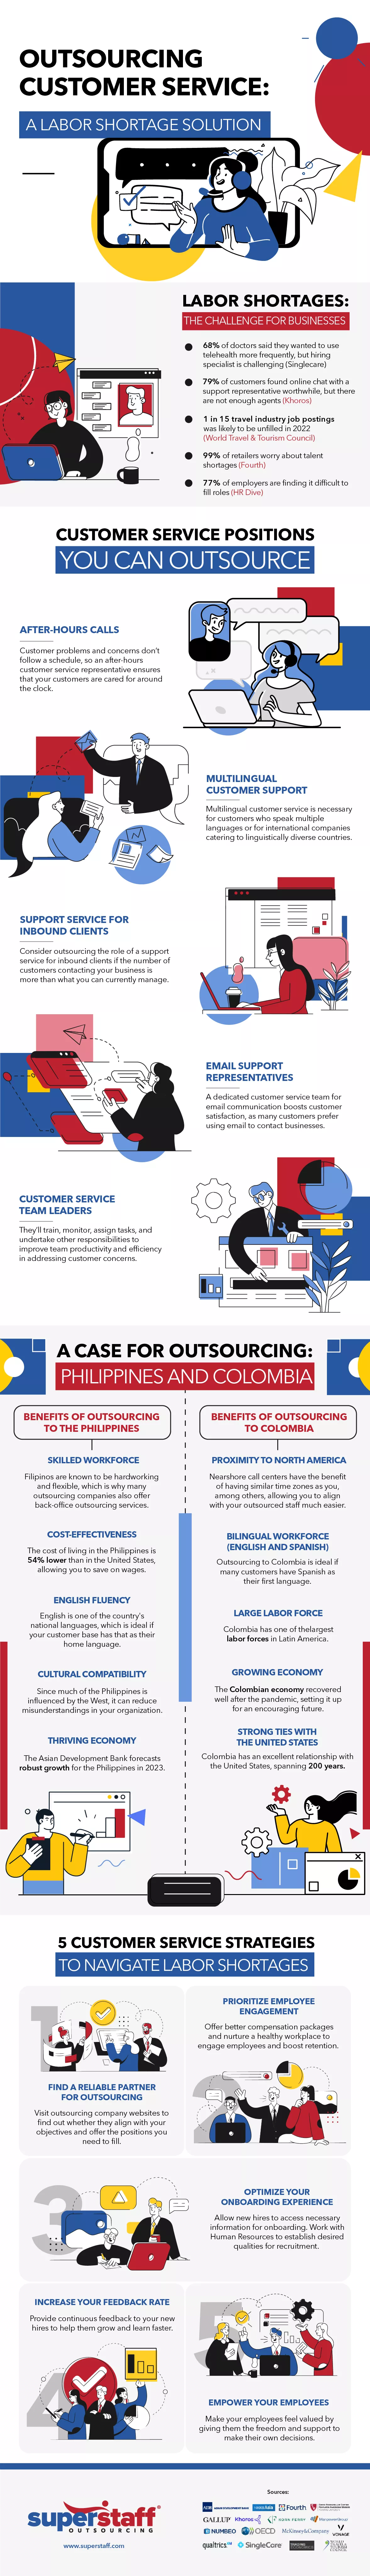 Outsourcing Customer Service: A Labor Shortage Solution infographic copy